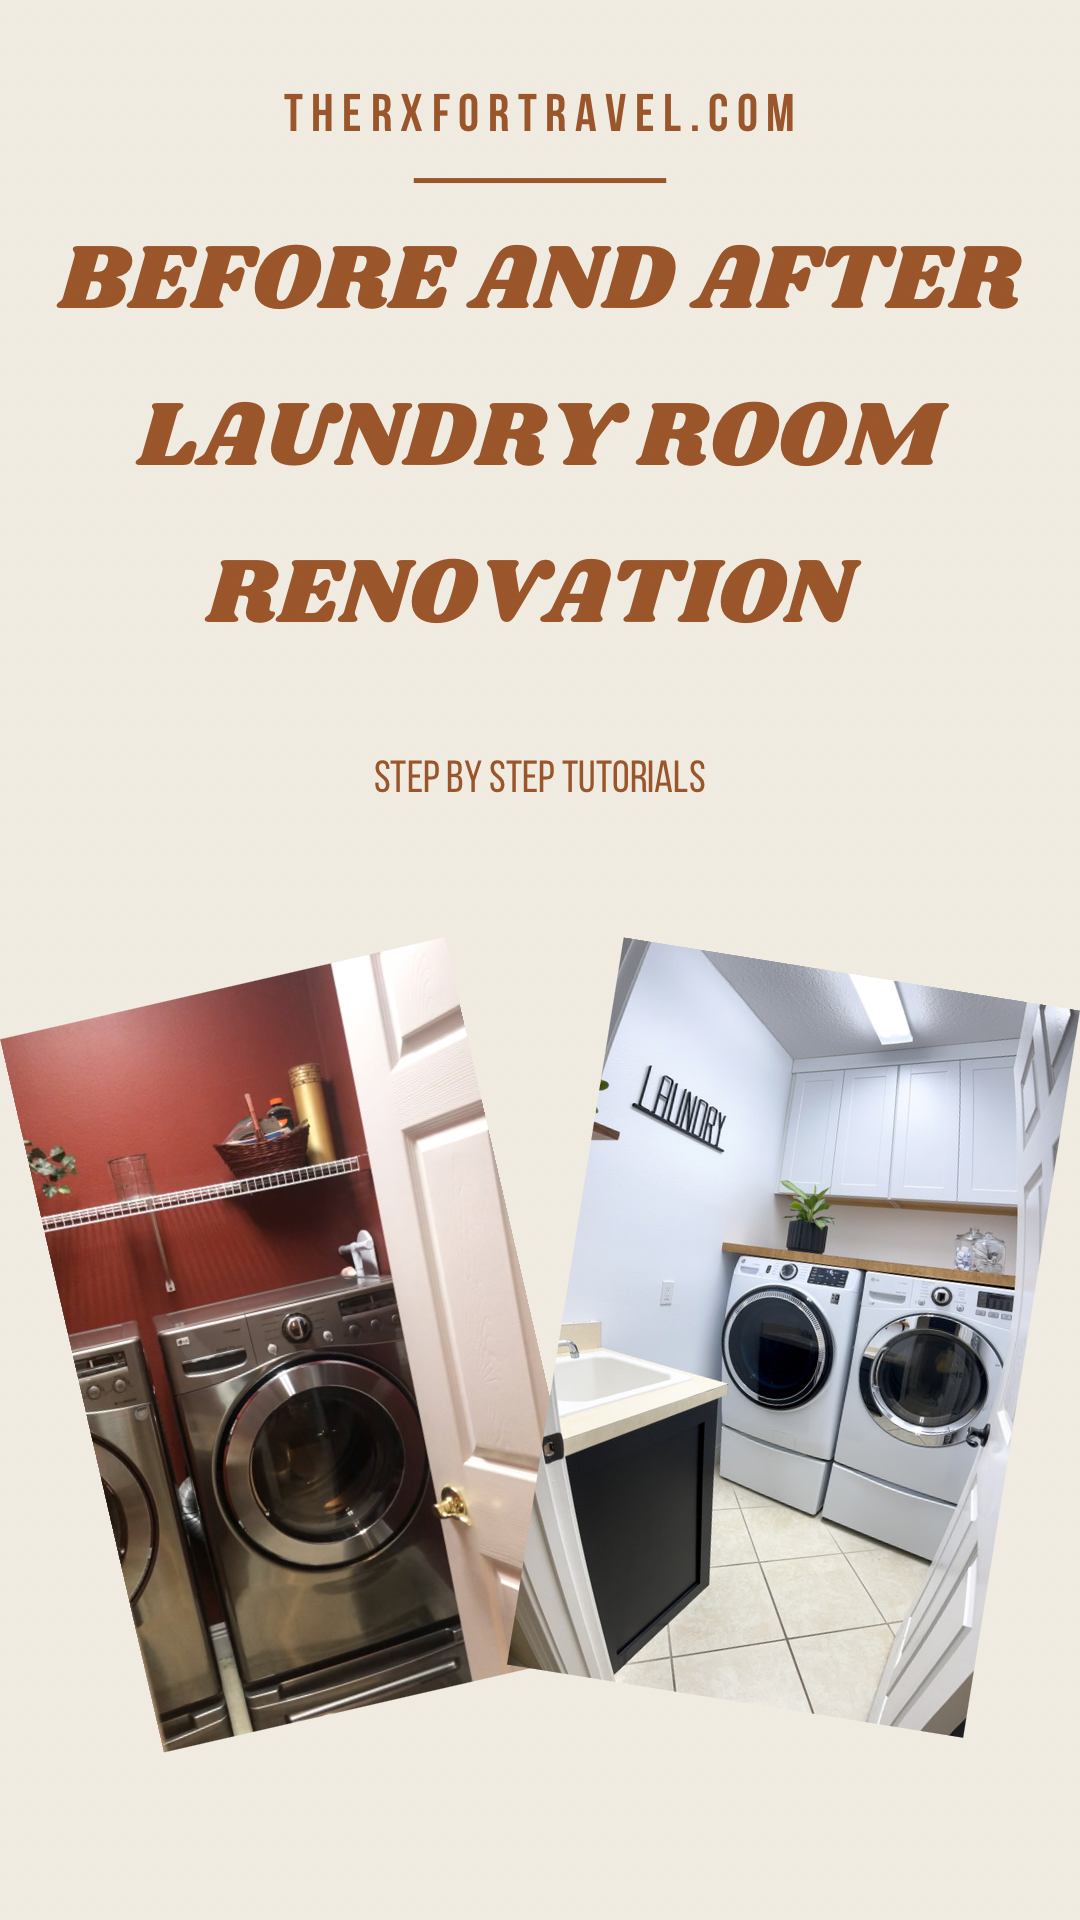 Before and After Laundry Room Renovation including step by step tutorials